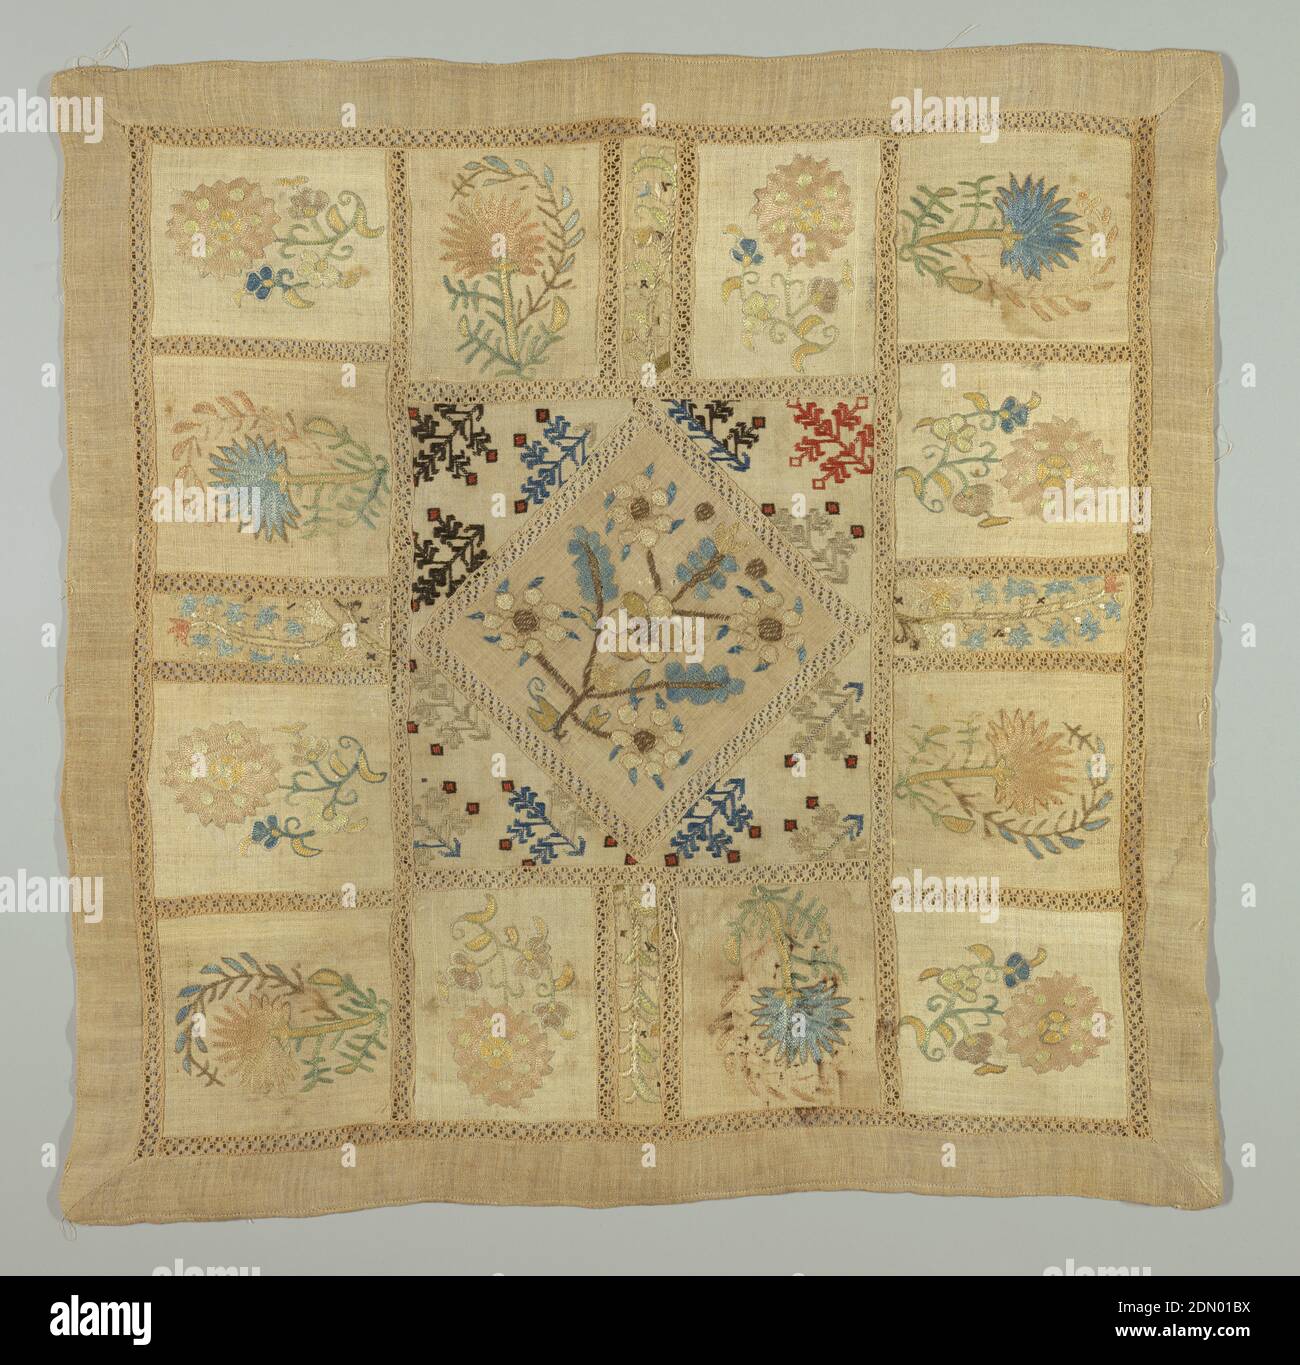 Table cover, Medium: silk and metal embroidery on linen foundation Technique: embroidered on plain weave, Square made up from small squares of embroidery joined with insertions of torchon lace. Large center square has stylized sprig repeat., Turkey or Greece, 19th century, embroidery & stitching, Table cover Stock Photo